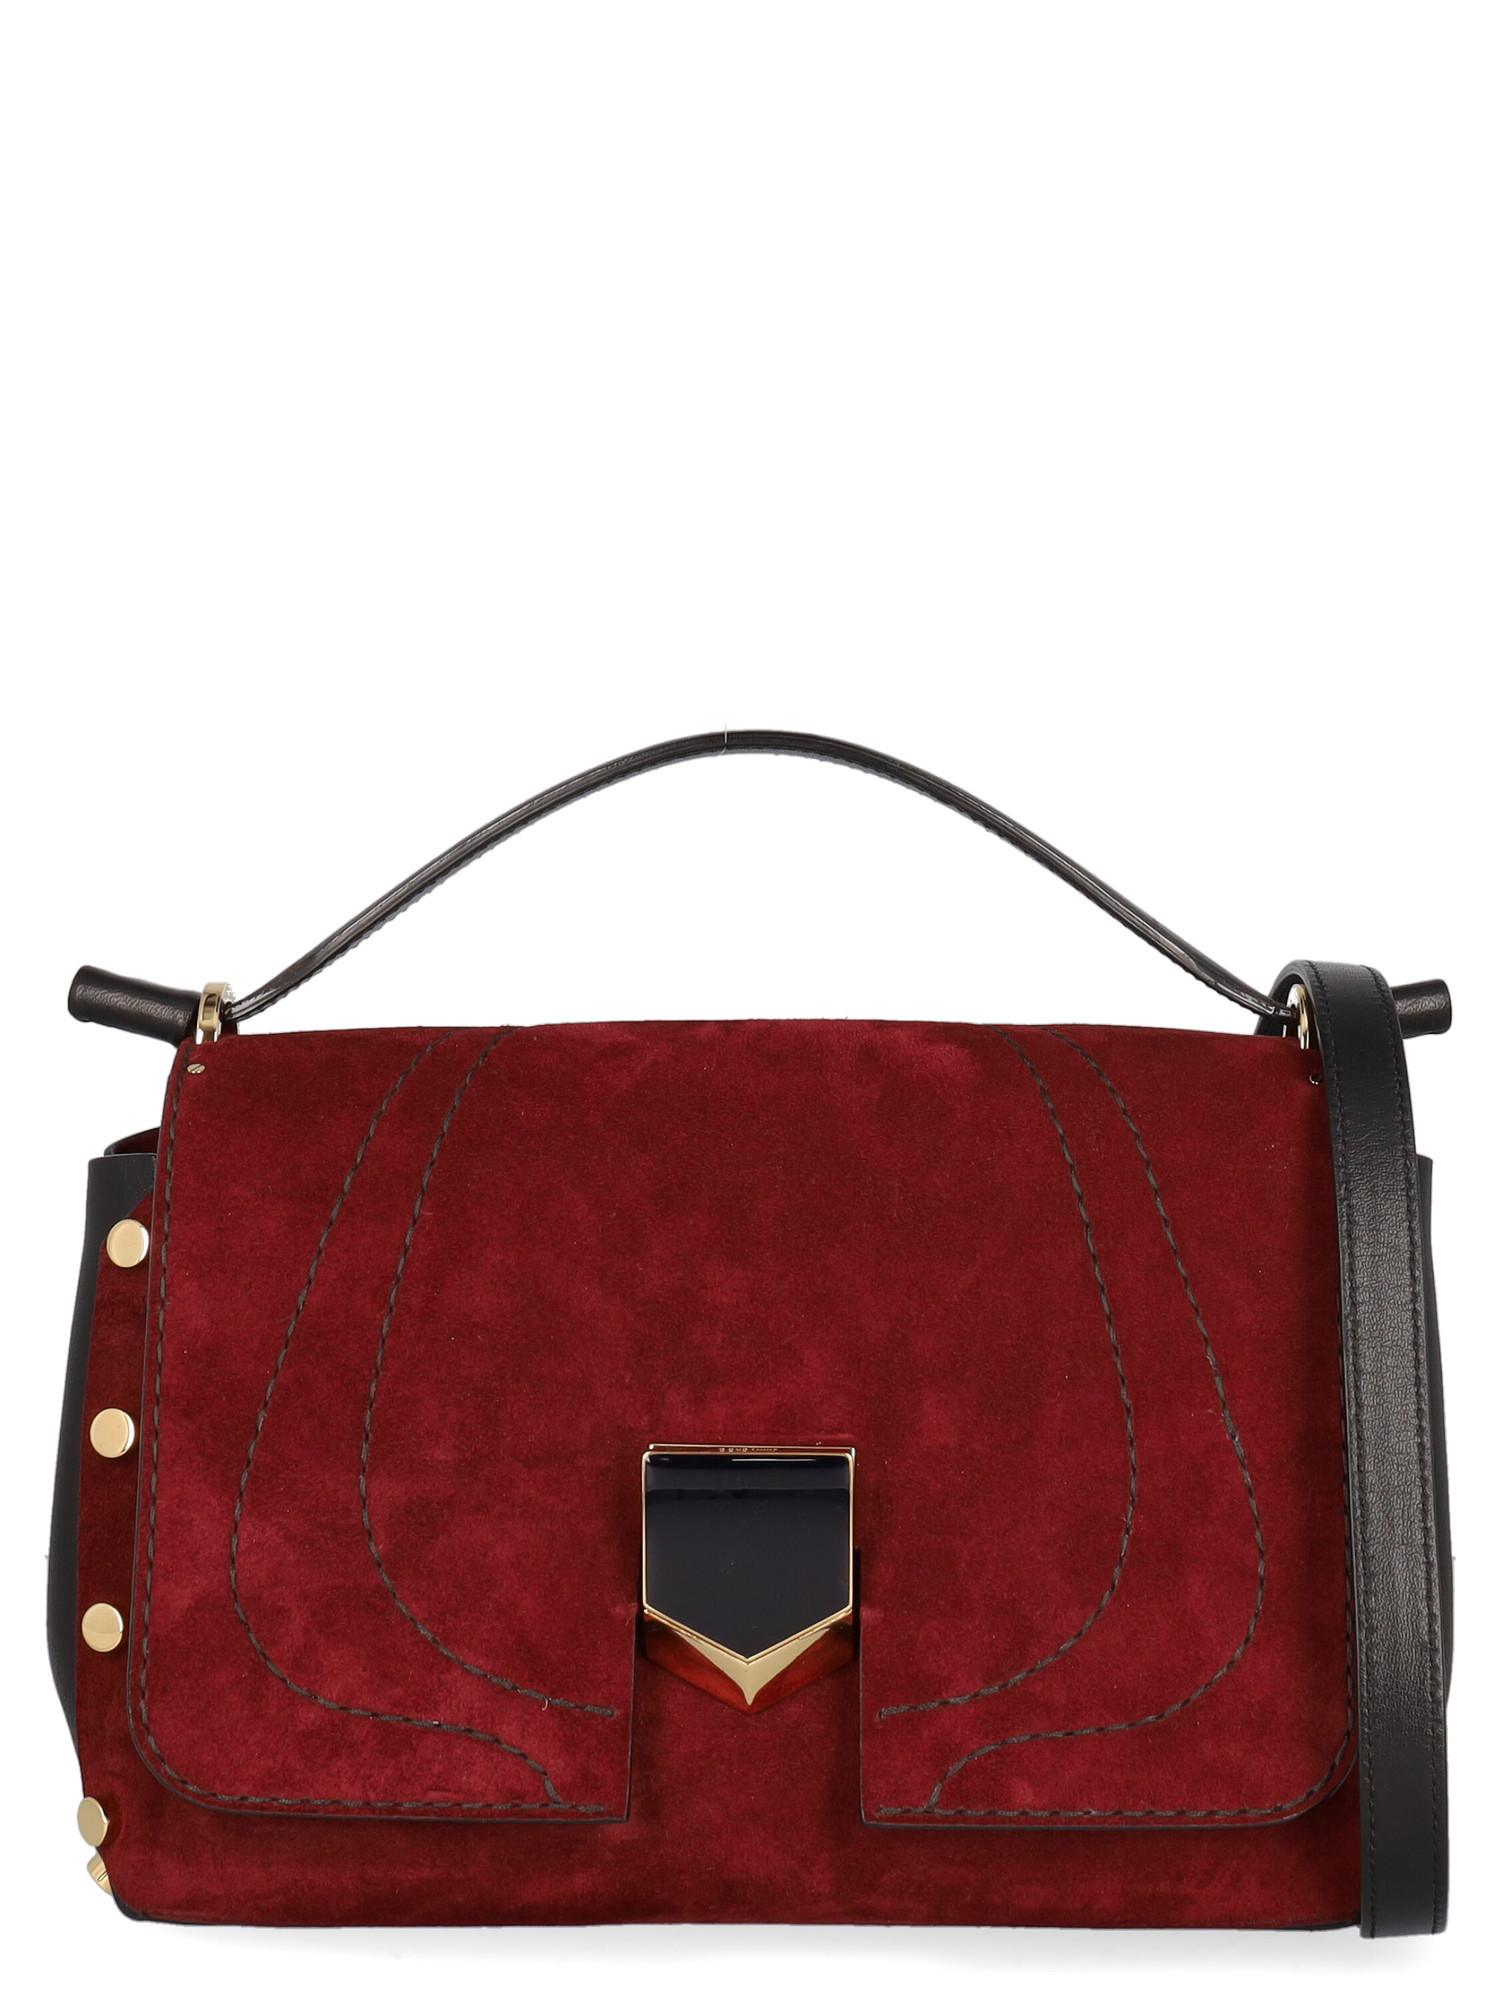 Condition: Good, Solid Color Leather, Color: Black, Burgundy -  -  -